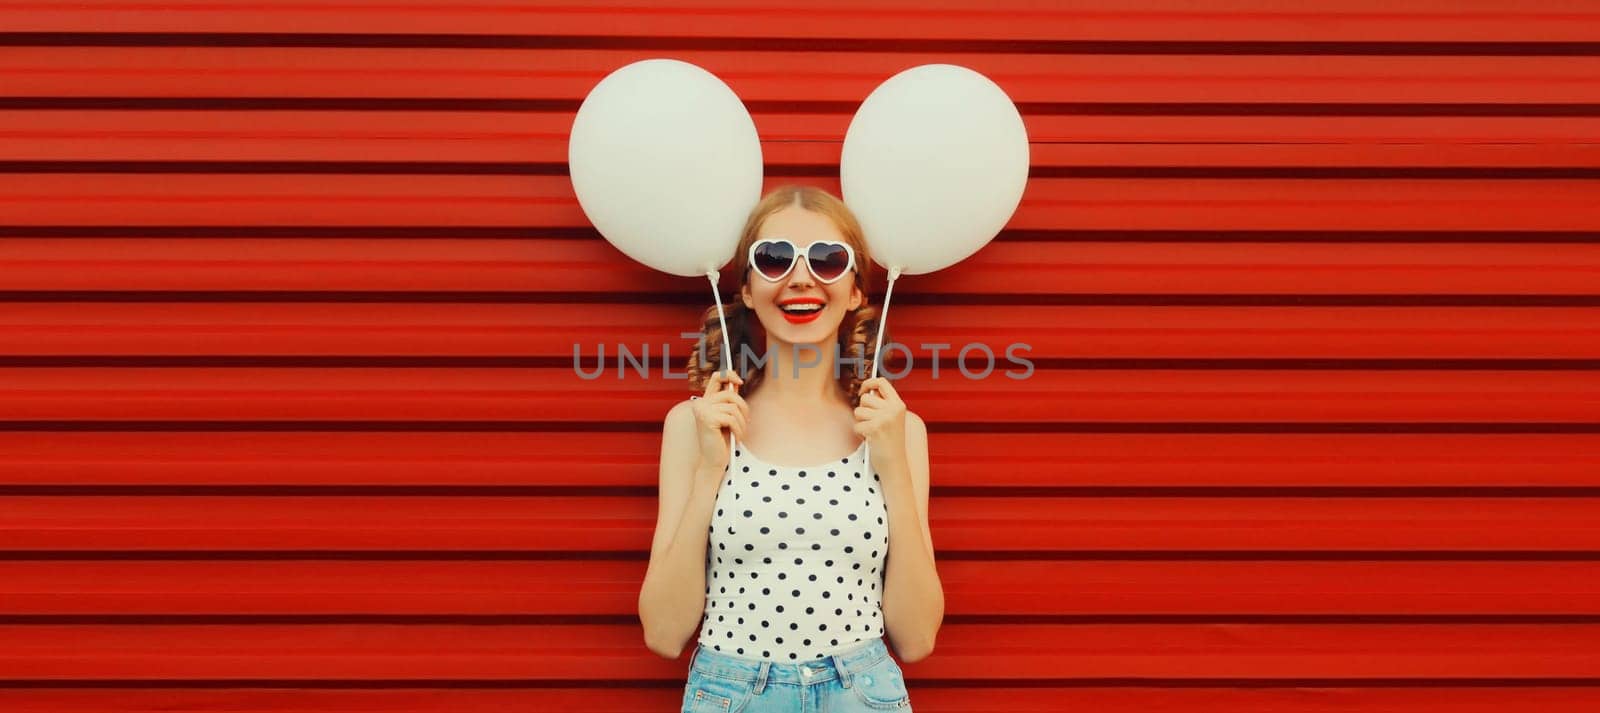 Summer, holiday, celebration, happy cheerful young woman with bright colorful balloons wearing white heart shaped sunglasses having fun on red background